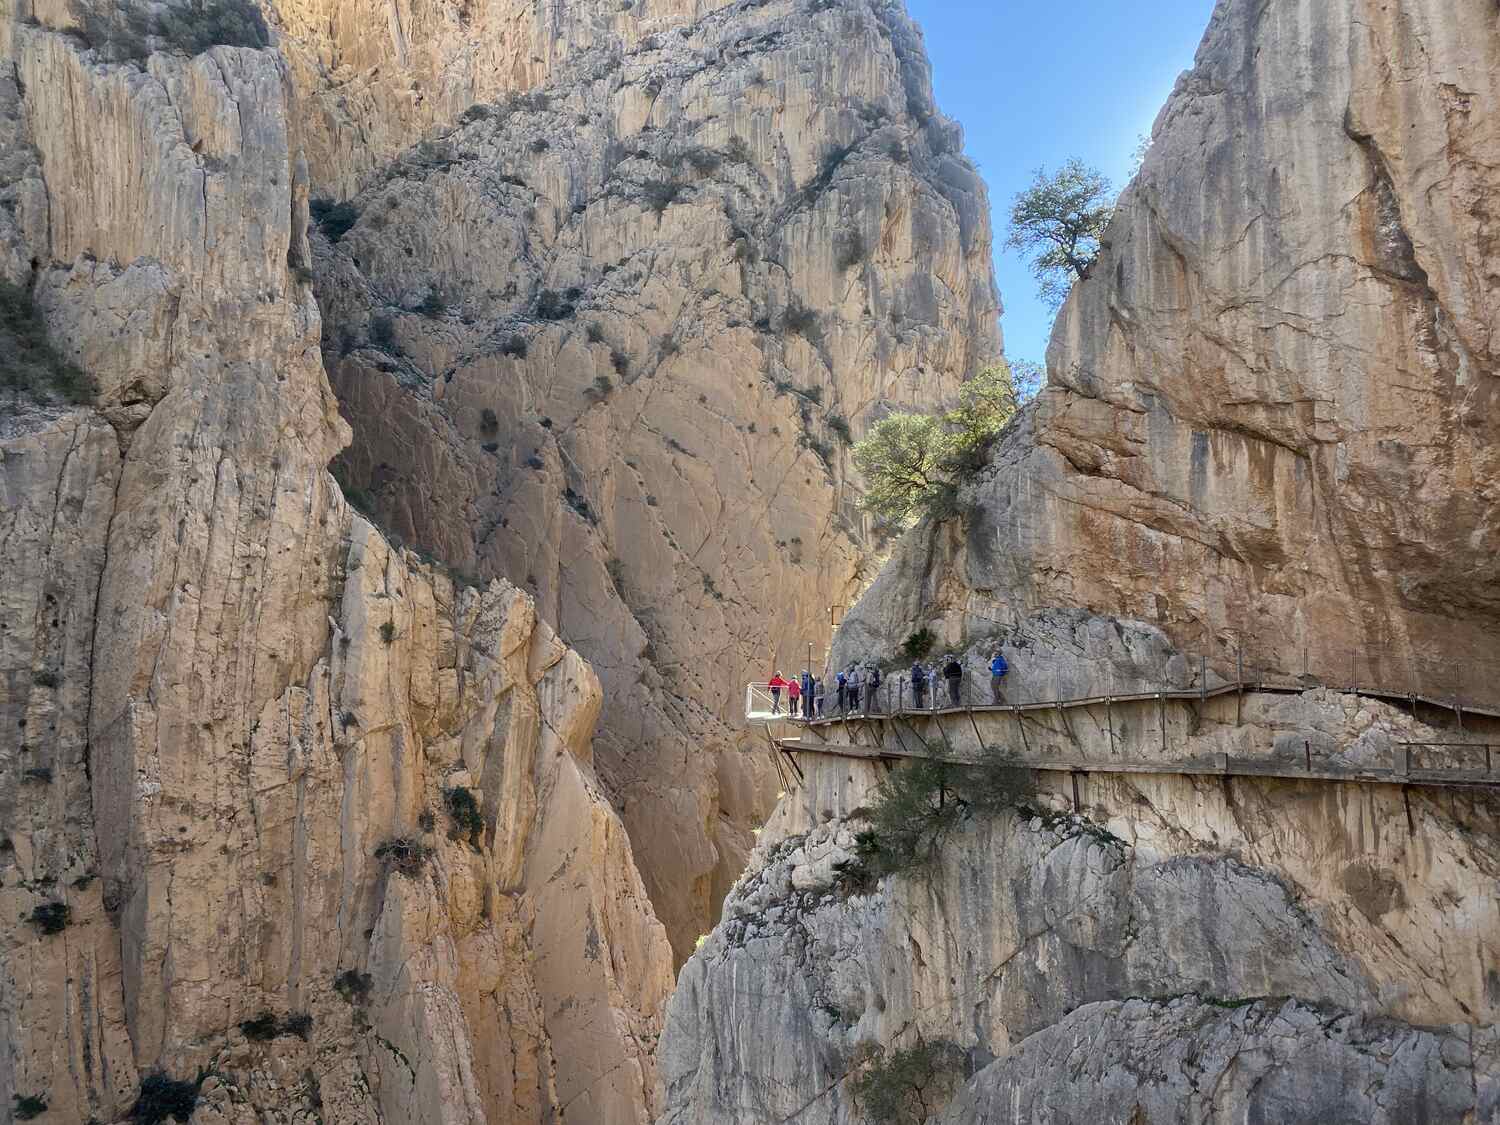 Tourist with outstretched arms atop the Caminito del Rey's walkway, high cliffs on either side.